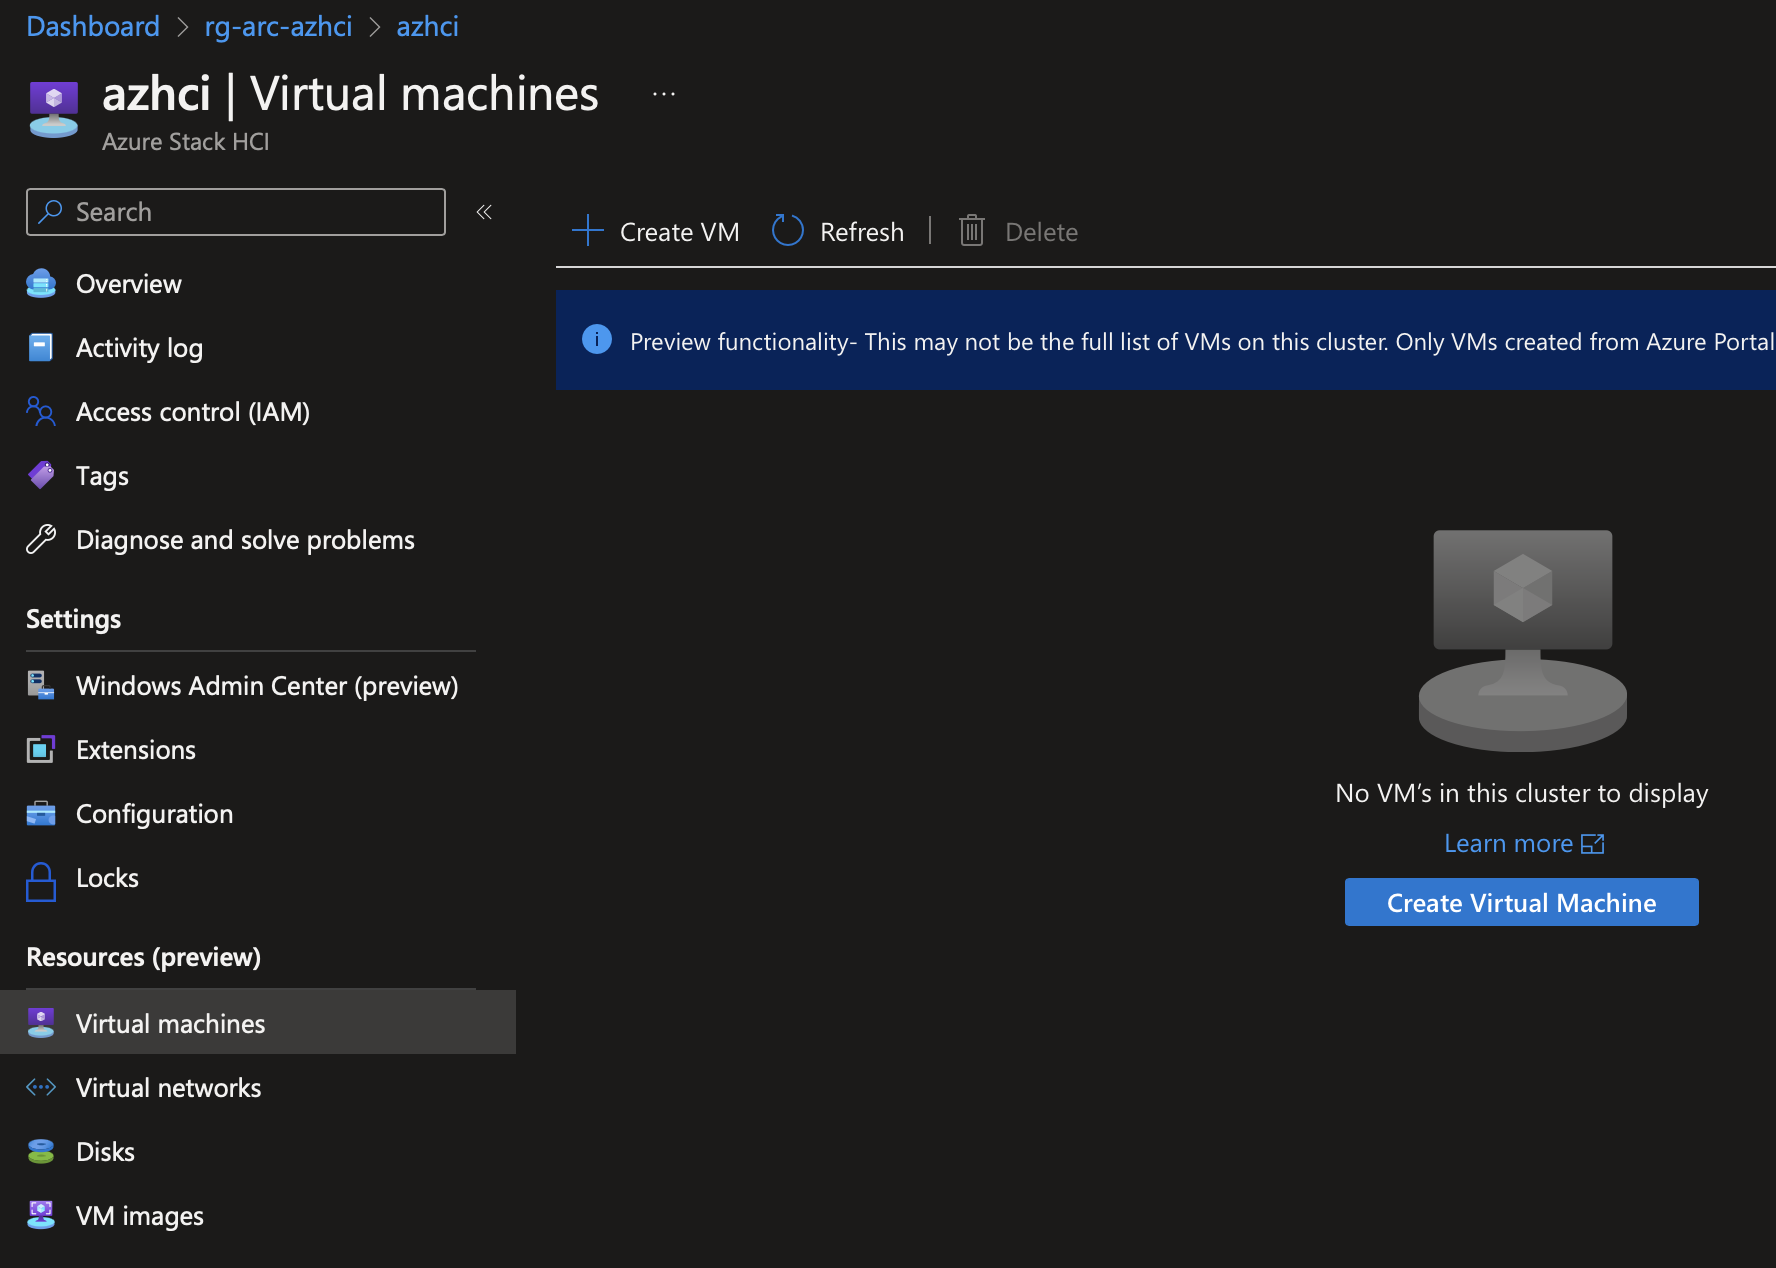 To create a VM from the Azure Portal to Azure Stack HCI, navigate to virtual machines. Then click on Create VM